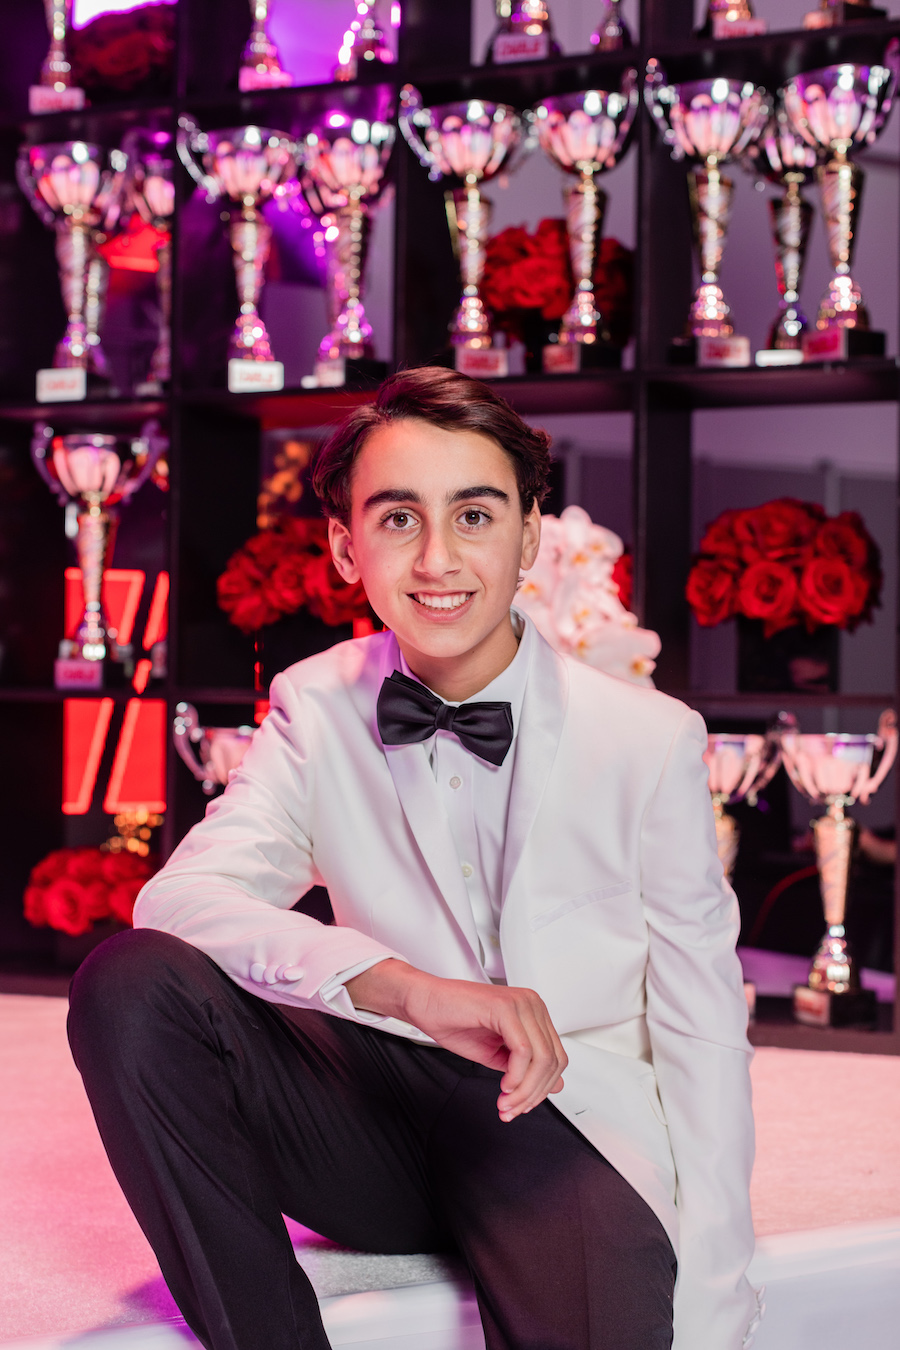 boy smiling with trophies and red rose bouquets in the background at bar mitzvah